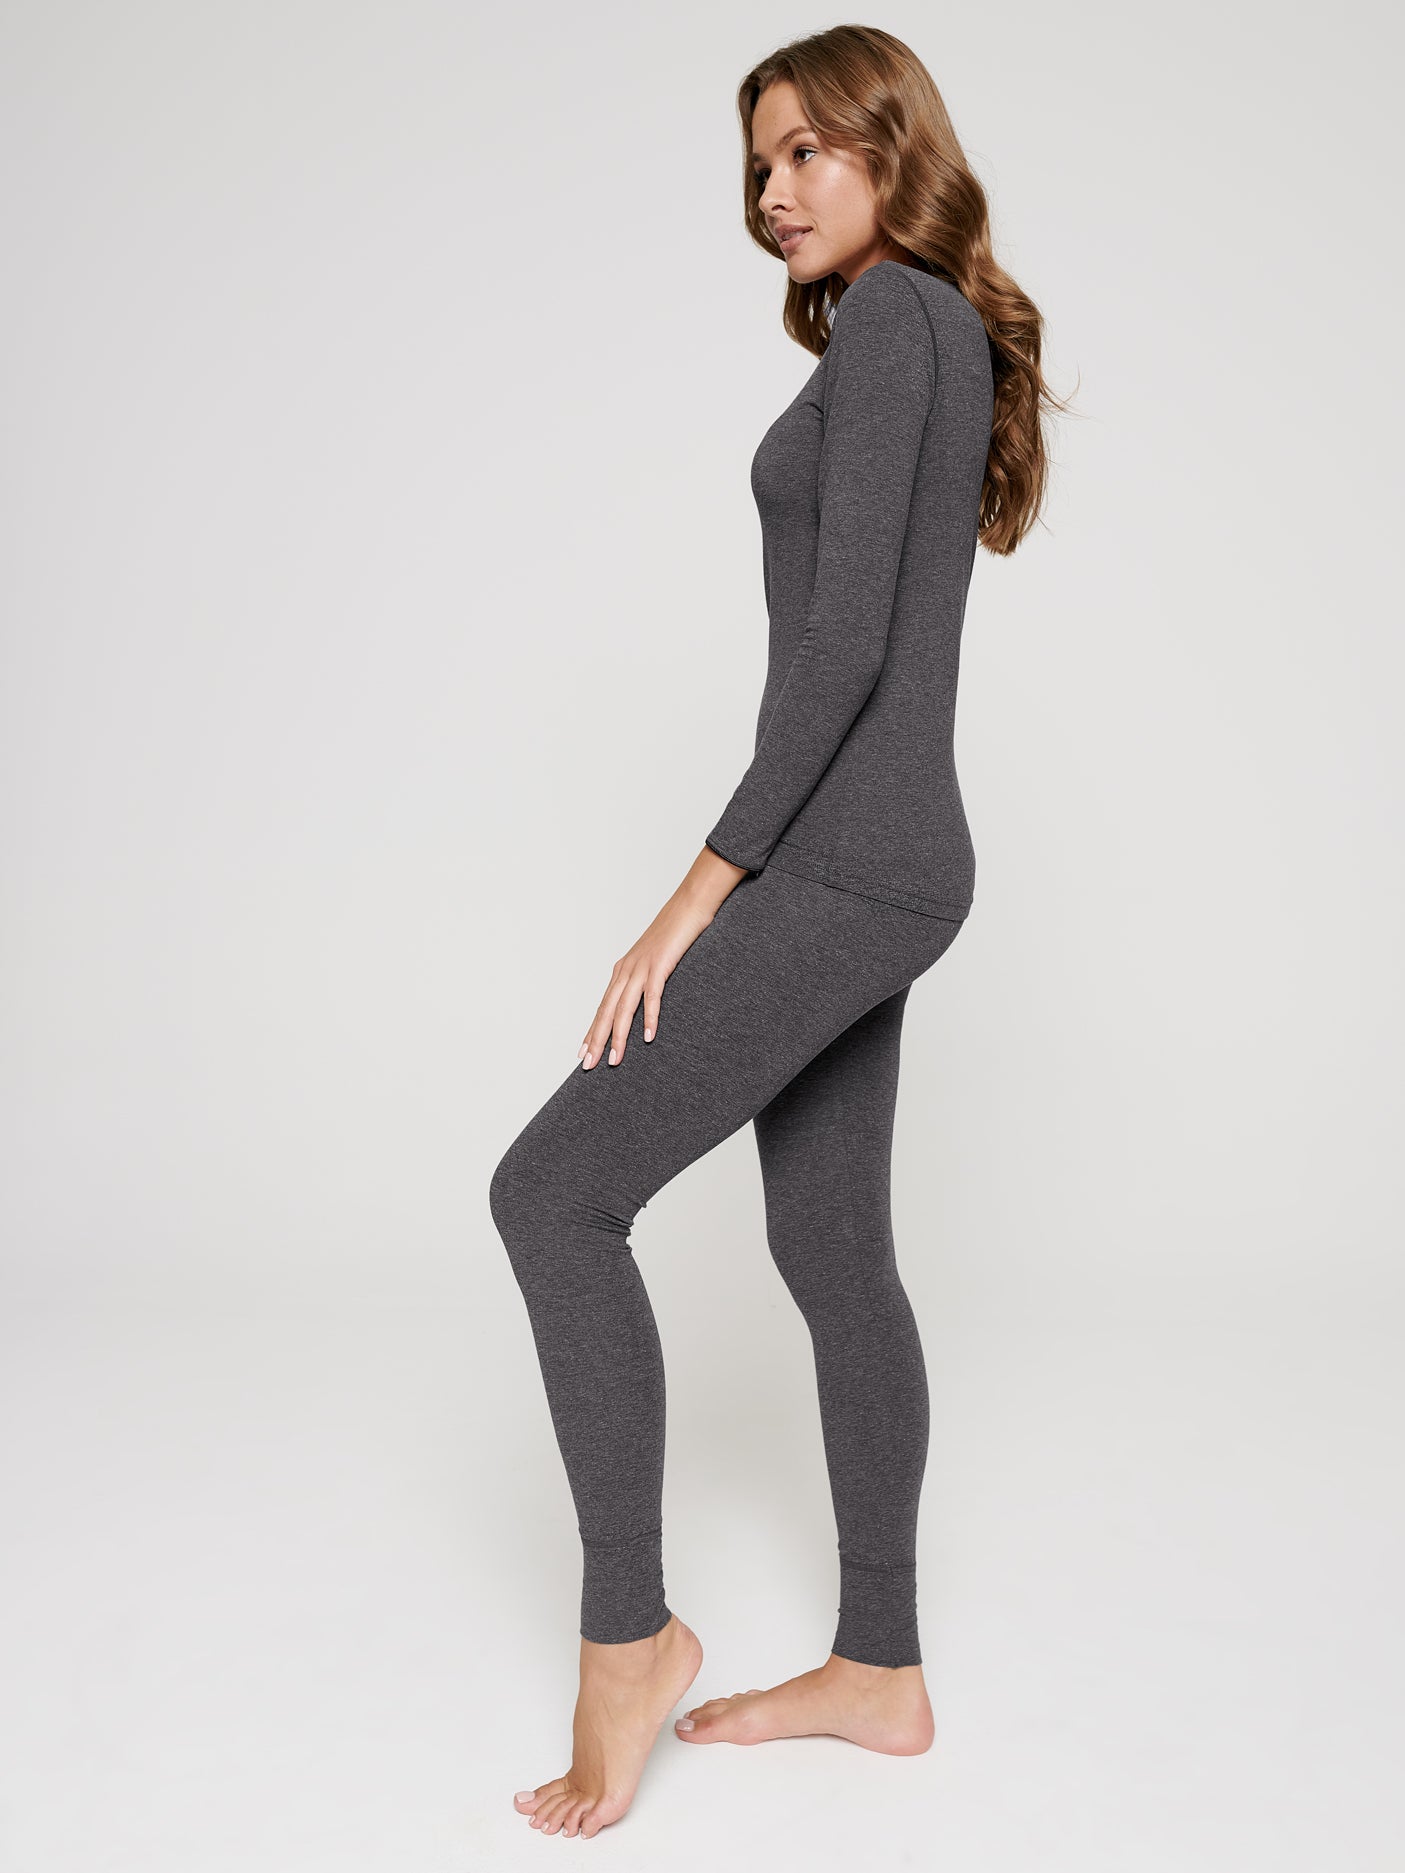 High-quality thermal leggings for cold days Ski underwear at -15 C